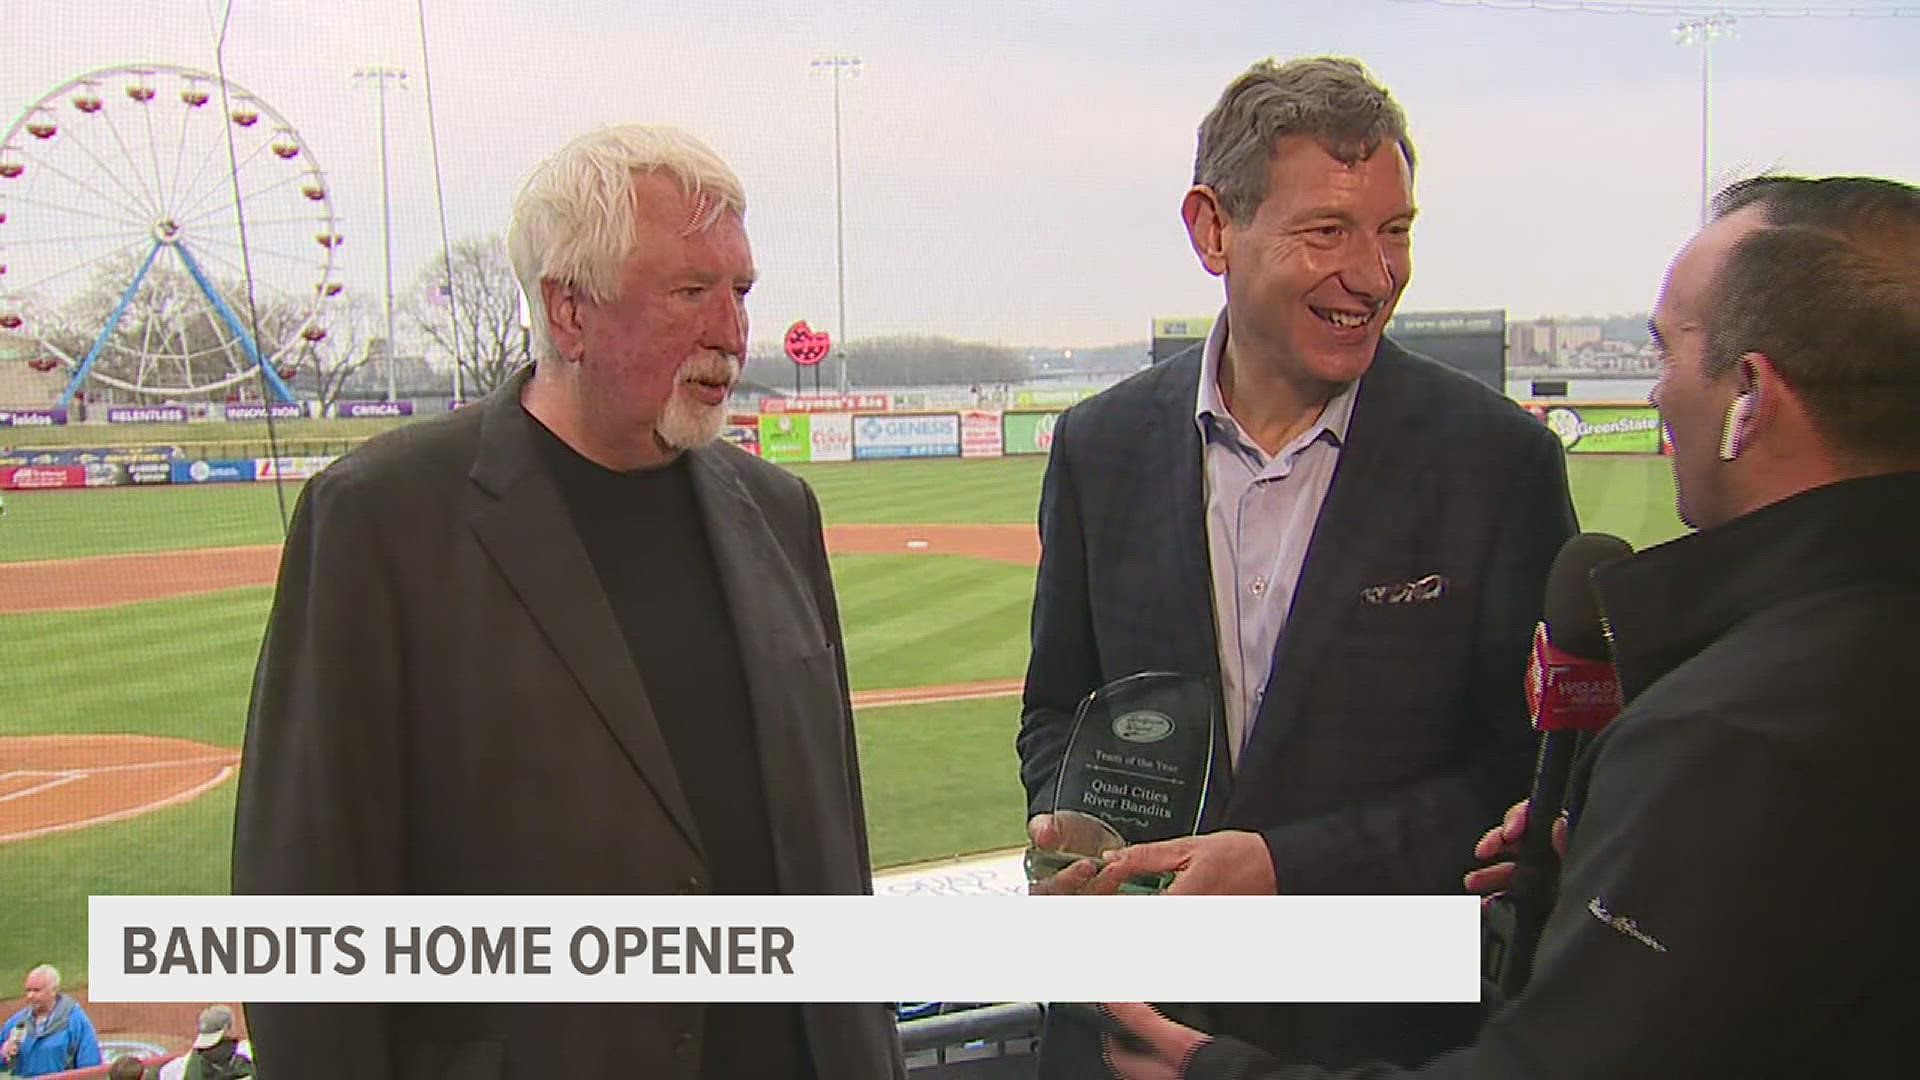 River Bandits owner Dave Heller was presented the award just prior to Tuesday's home opener at Modern Woodmen Park.